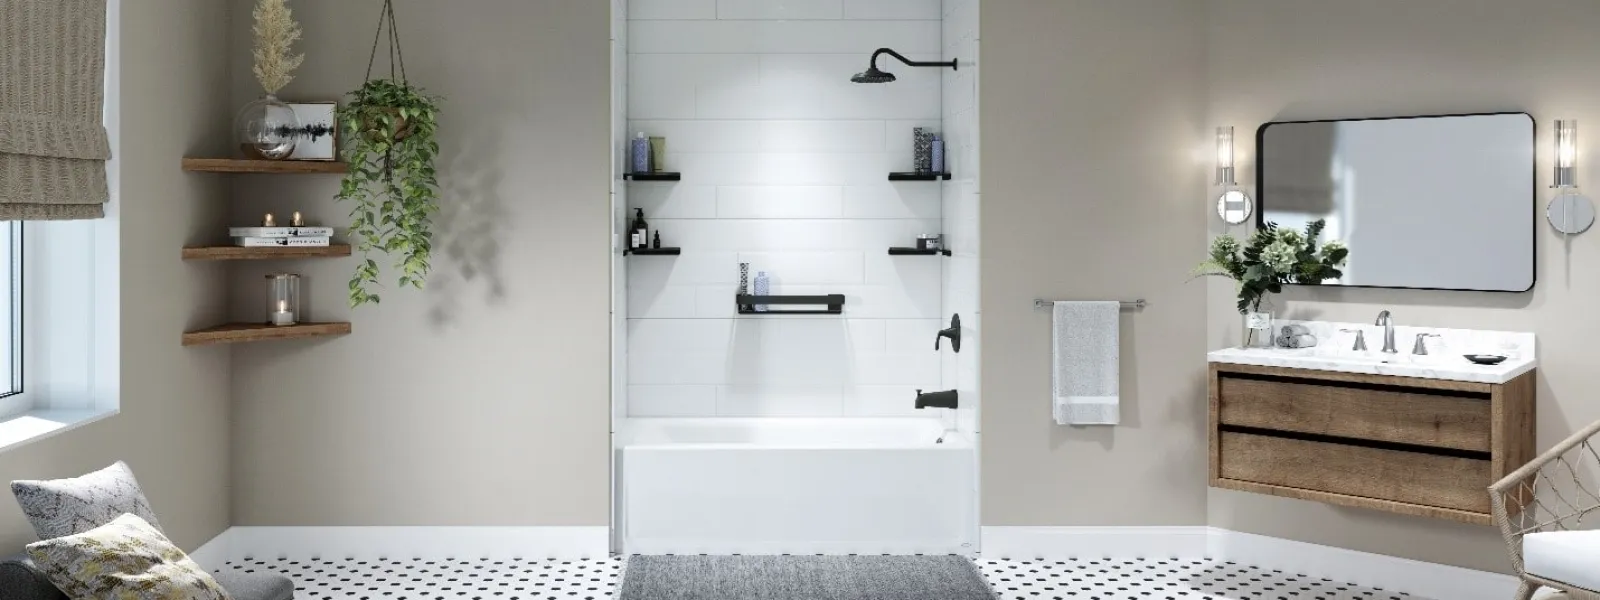 Why an Acrylic Tub is Your Best Upgrade Option